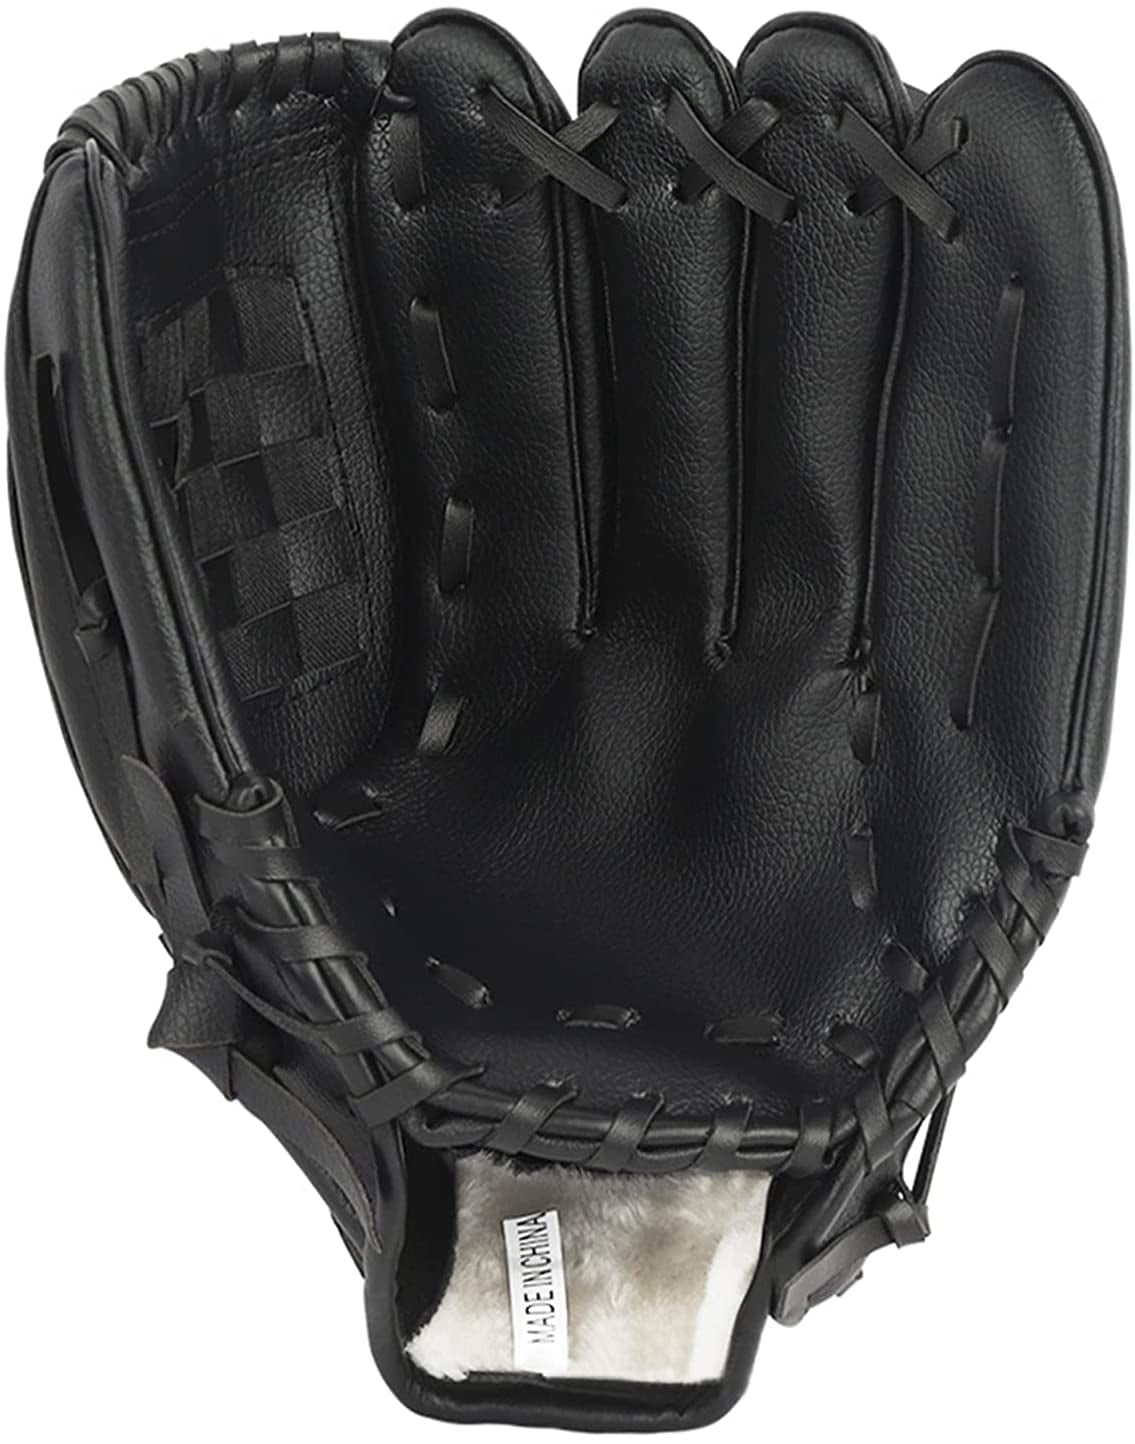 Baseball Glove Sports Batting Gloves Catchers Mitt with PU Leather for Adult Youth Teenager Children 